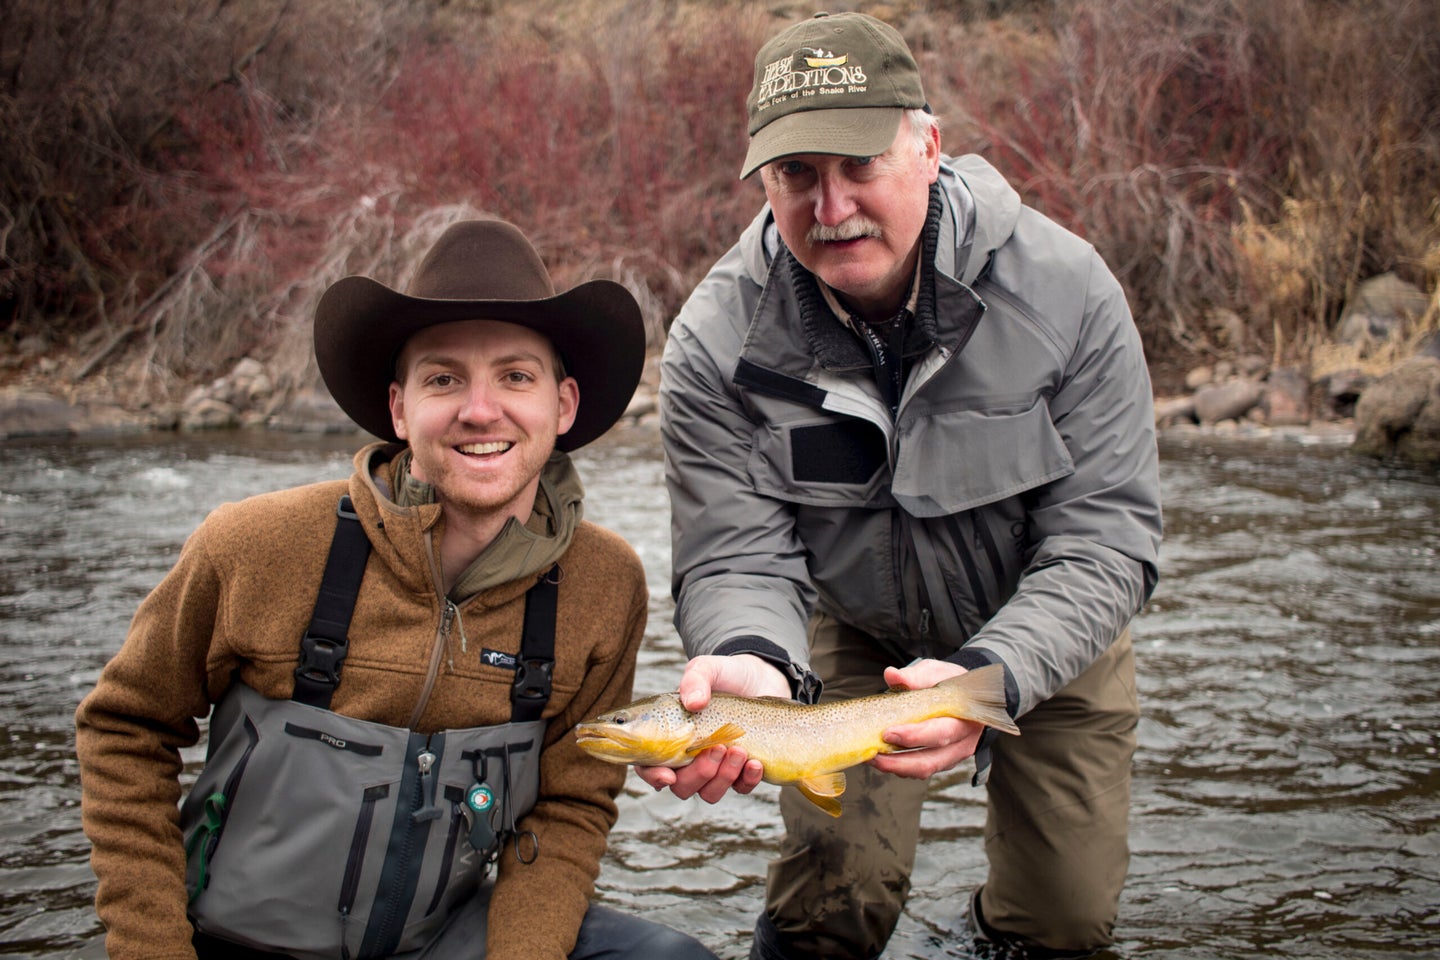 A young fisherman in a cowboy hat stand stands to an older fisherman holding a brown trout